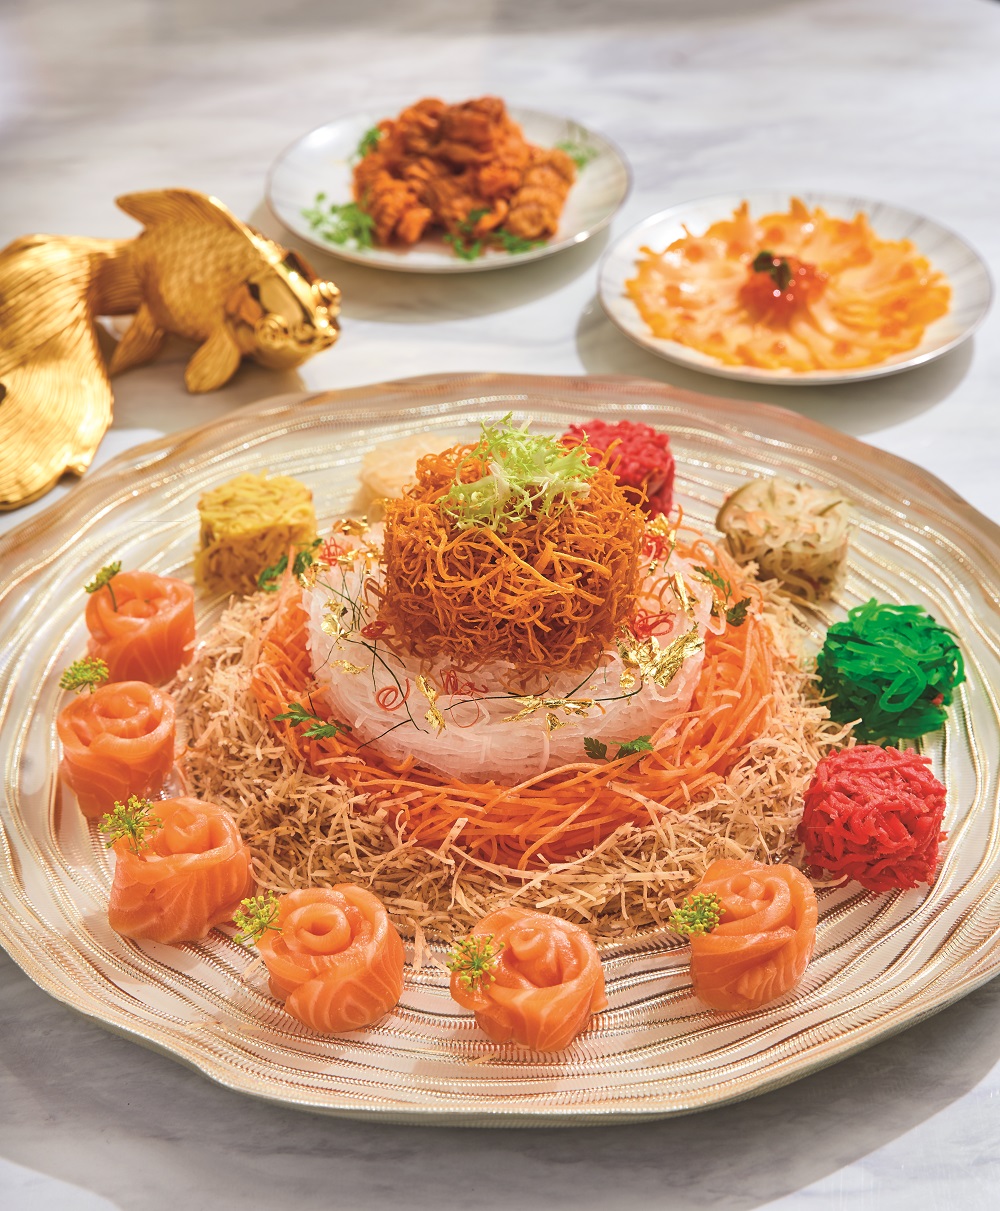 Yu Sheng with Salmon, Sea Whelk, Coral Clam and Salmon Roe